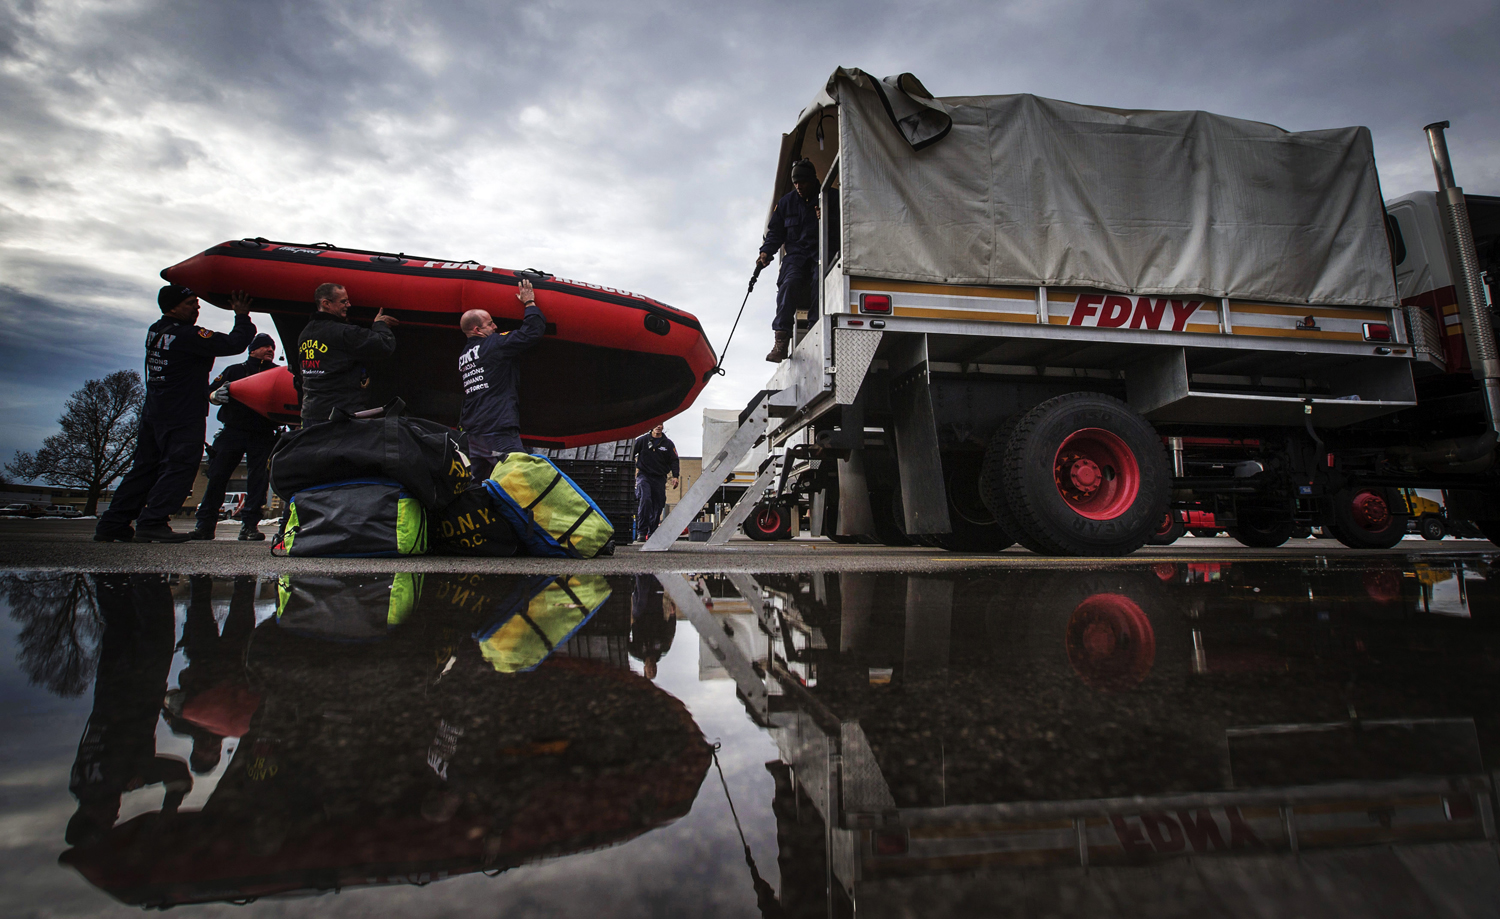 Firefighters from New York City load a rescue boat to prepare for possible flooding following a massive snow storm in Williamsville, New York on November 23, 2014. (Mark Blinch —Reuters)